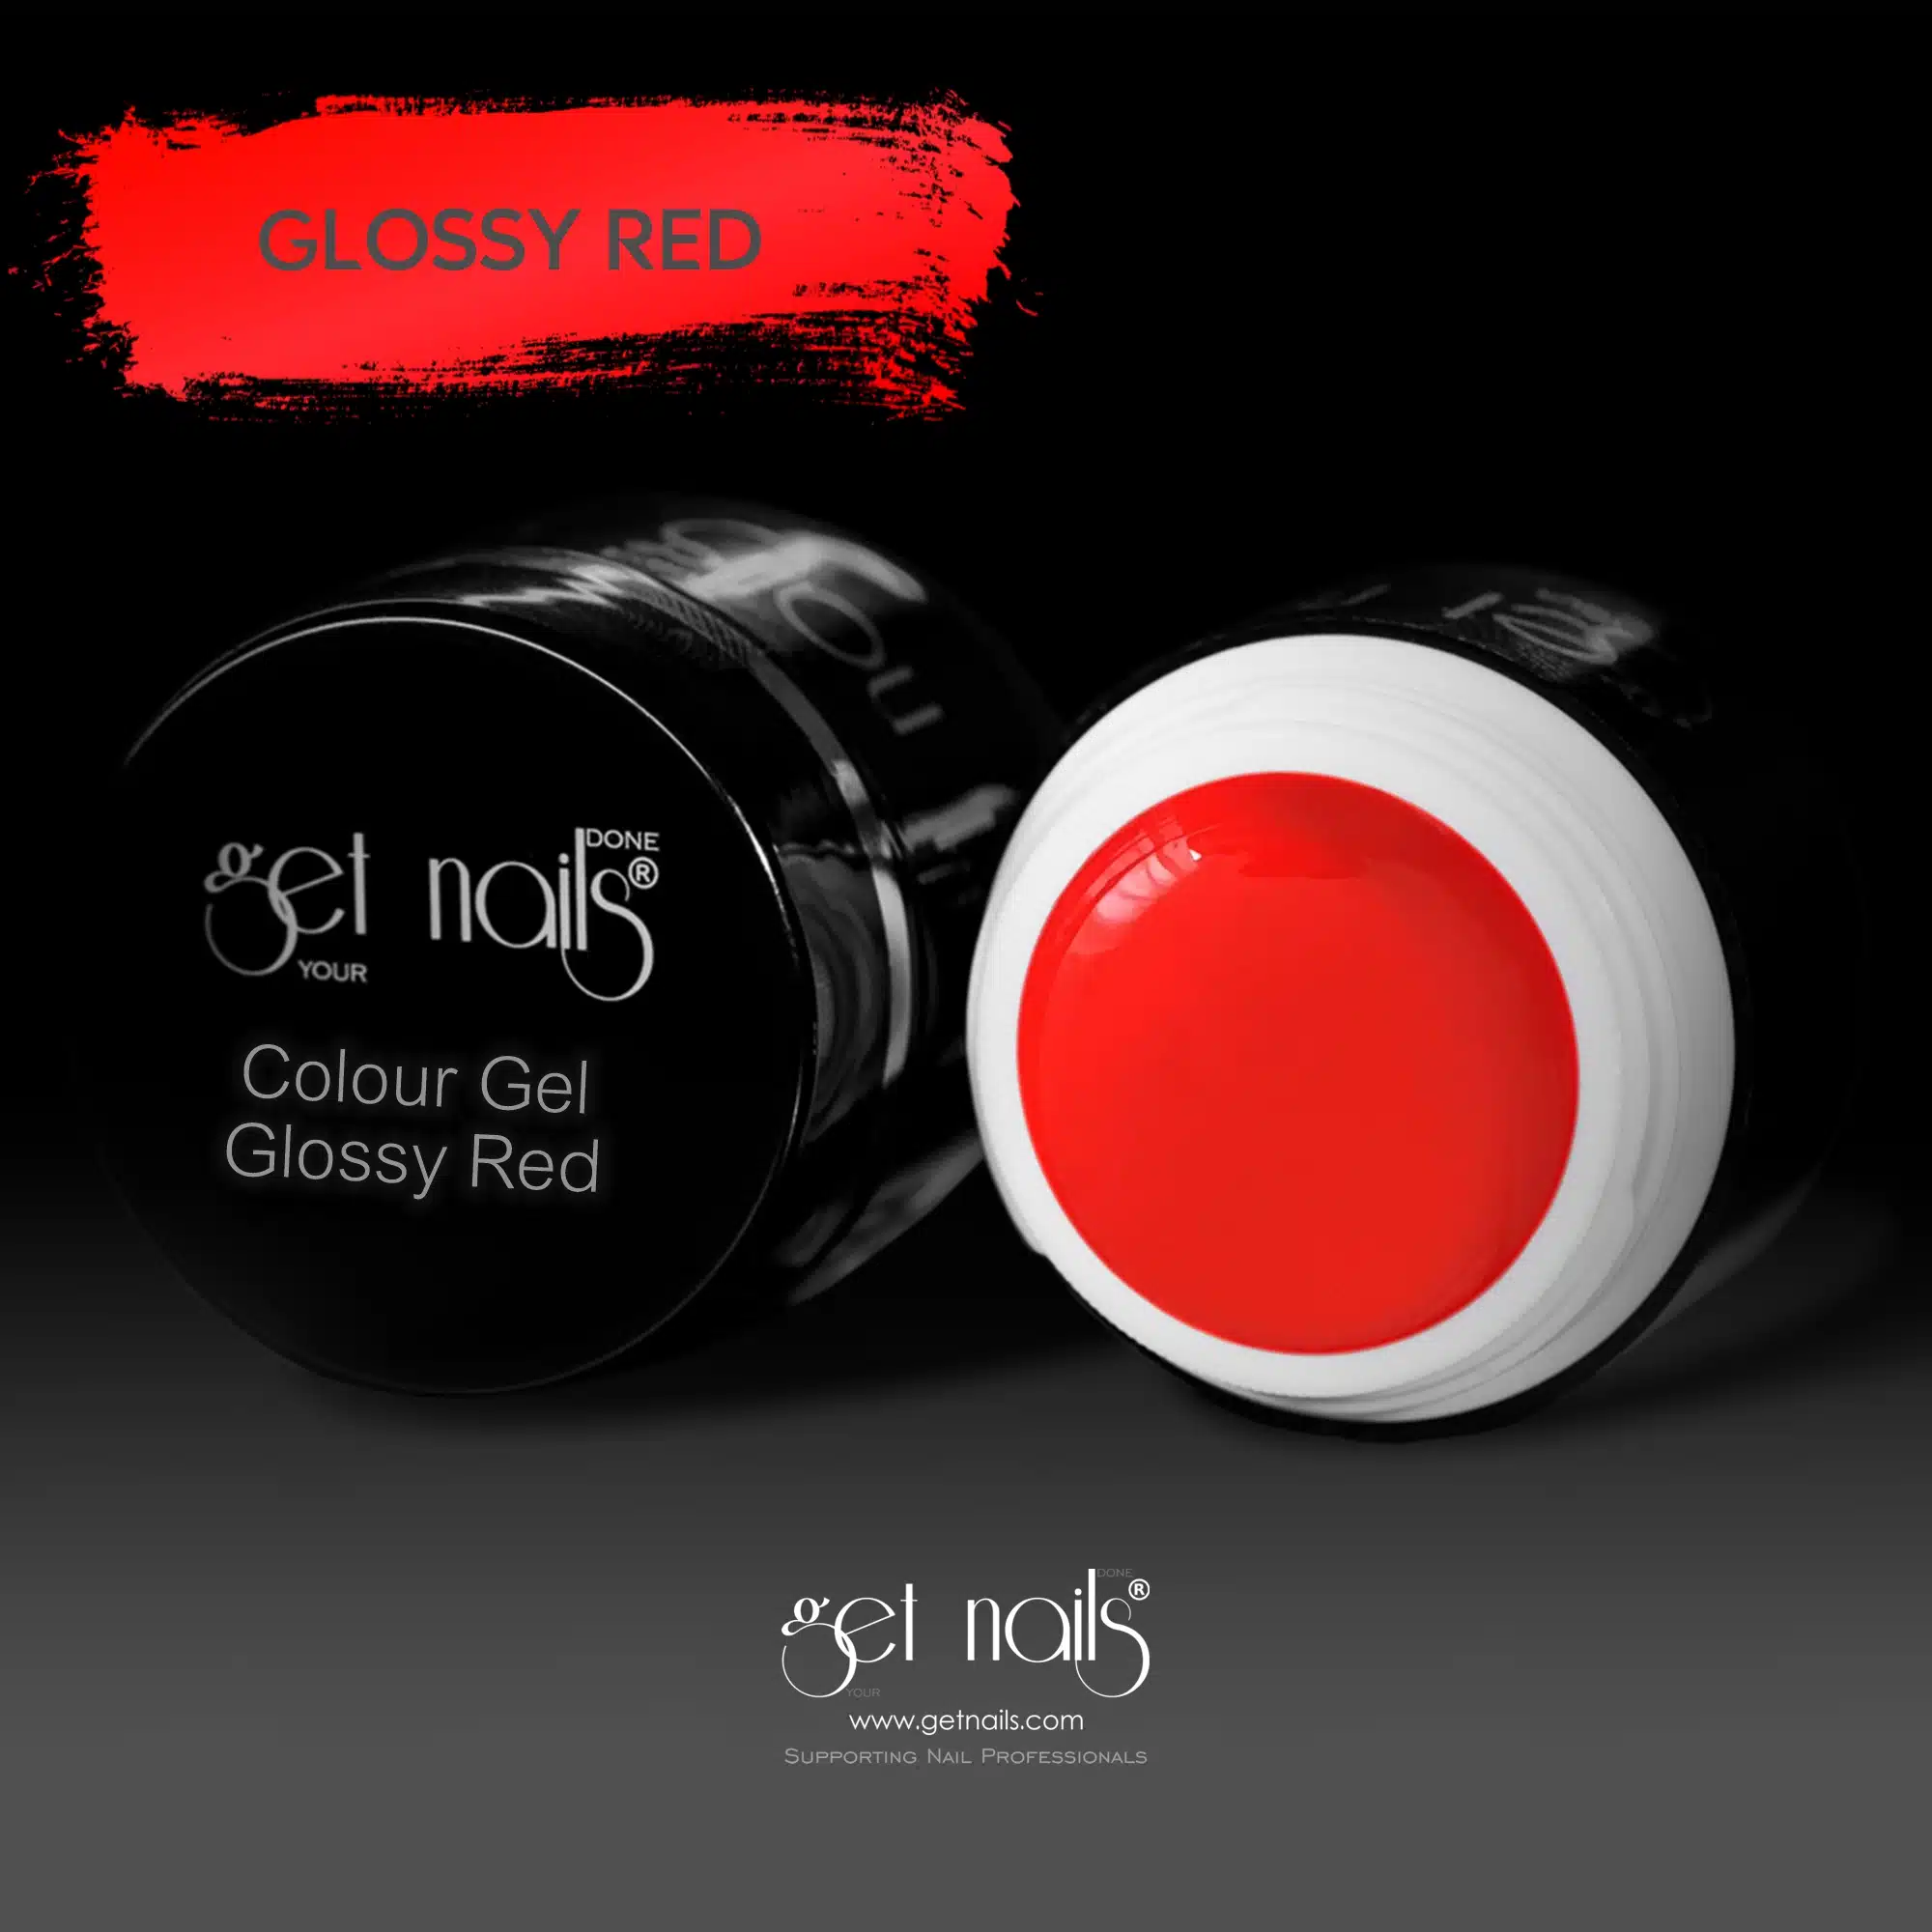 Get Nails Austria - Colour Gel Glossy Red 5g